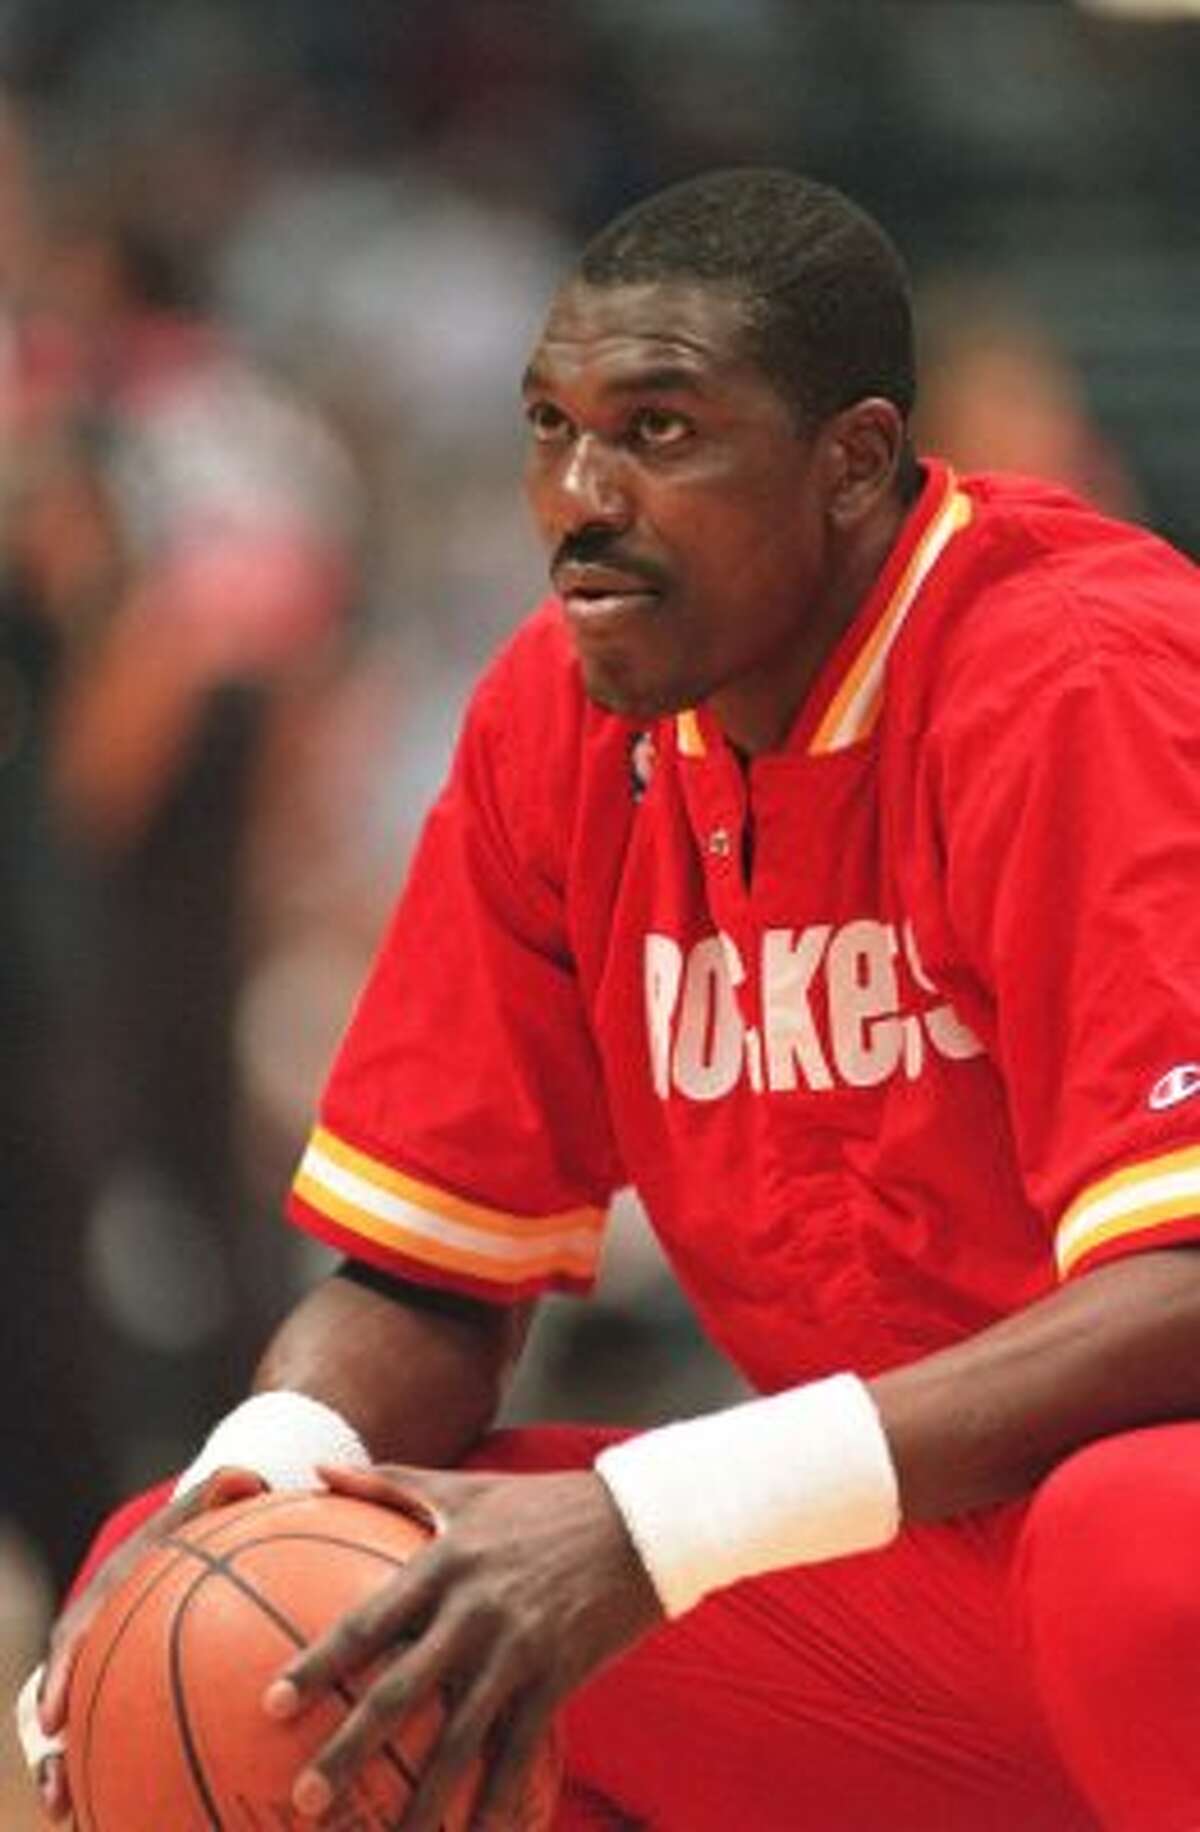 HAKEEM OLAJUWON, ROCKETS Positions: C Seasons: 17 Years: 1984-2001 Highlights: After leading the University of Houston to three NCAA Final Fours, he led the Rockets to three NBA Finals and two NBA championships. Inducted into the Basketball Hall of Fame in 2008. Spent his final NBA season with Toronto.